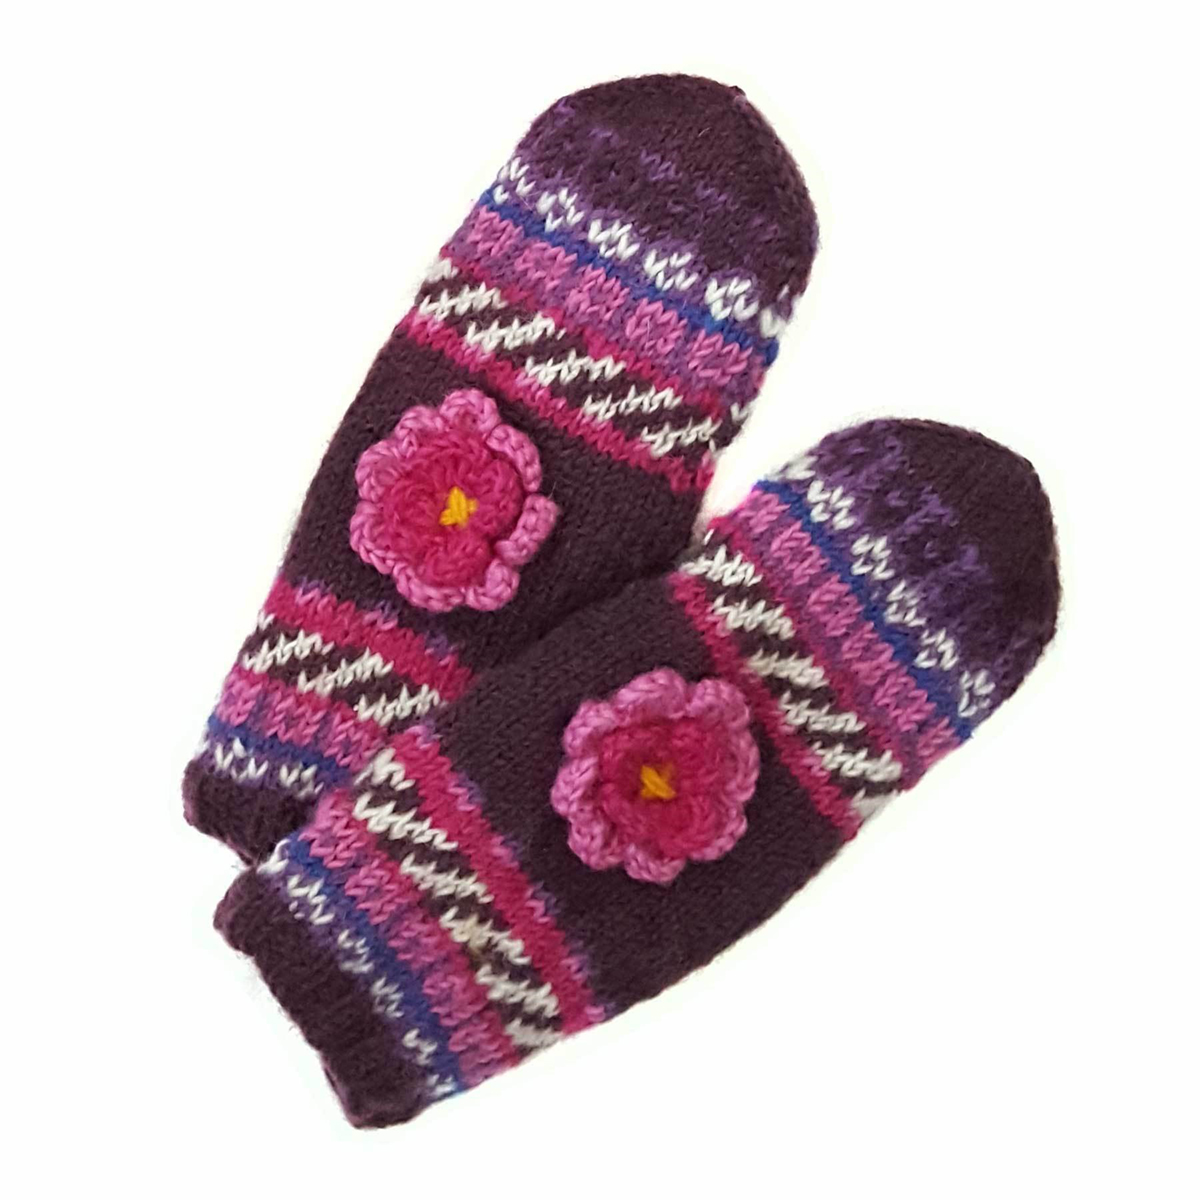 Picture of Lumi Knitted Mittens 100% Wool Fleece Lined